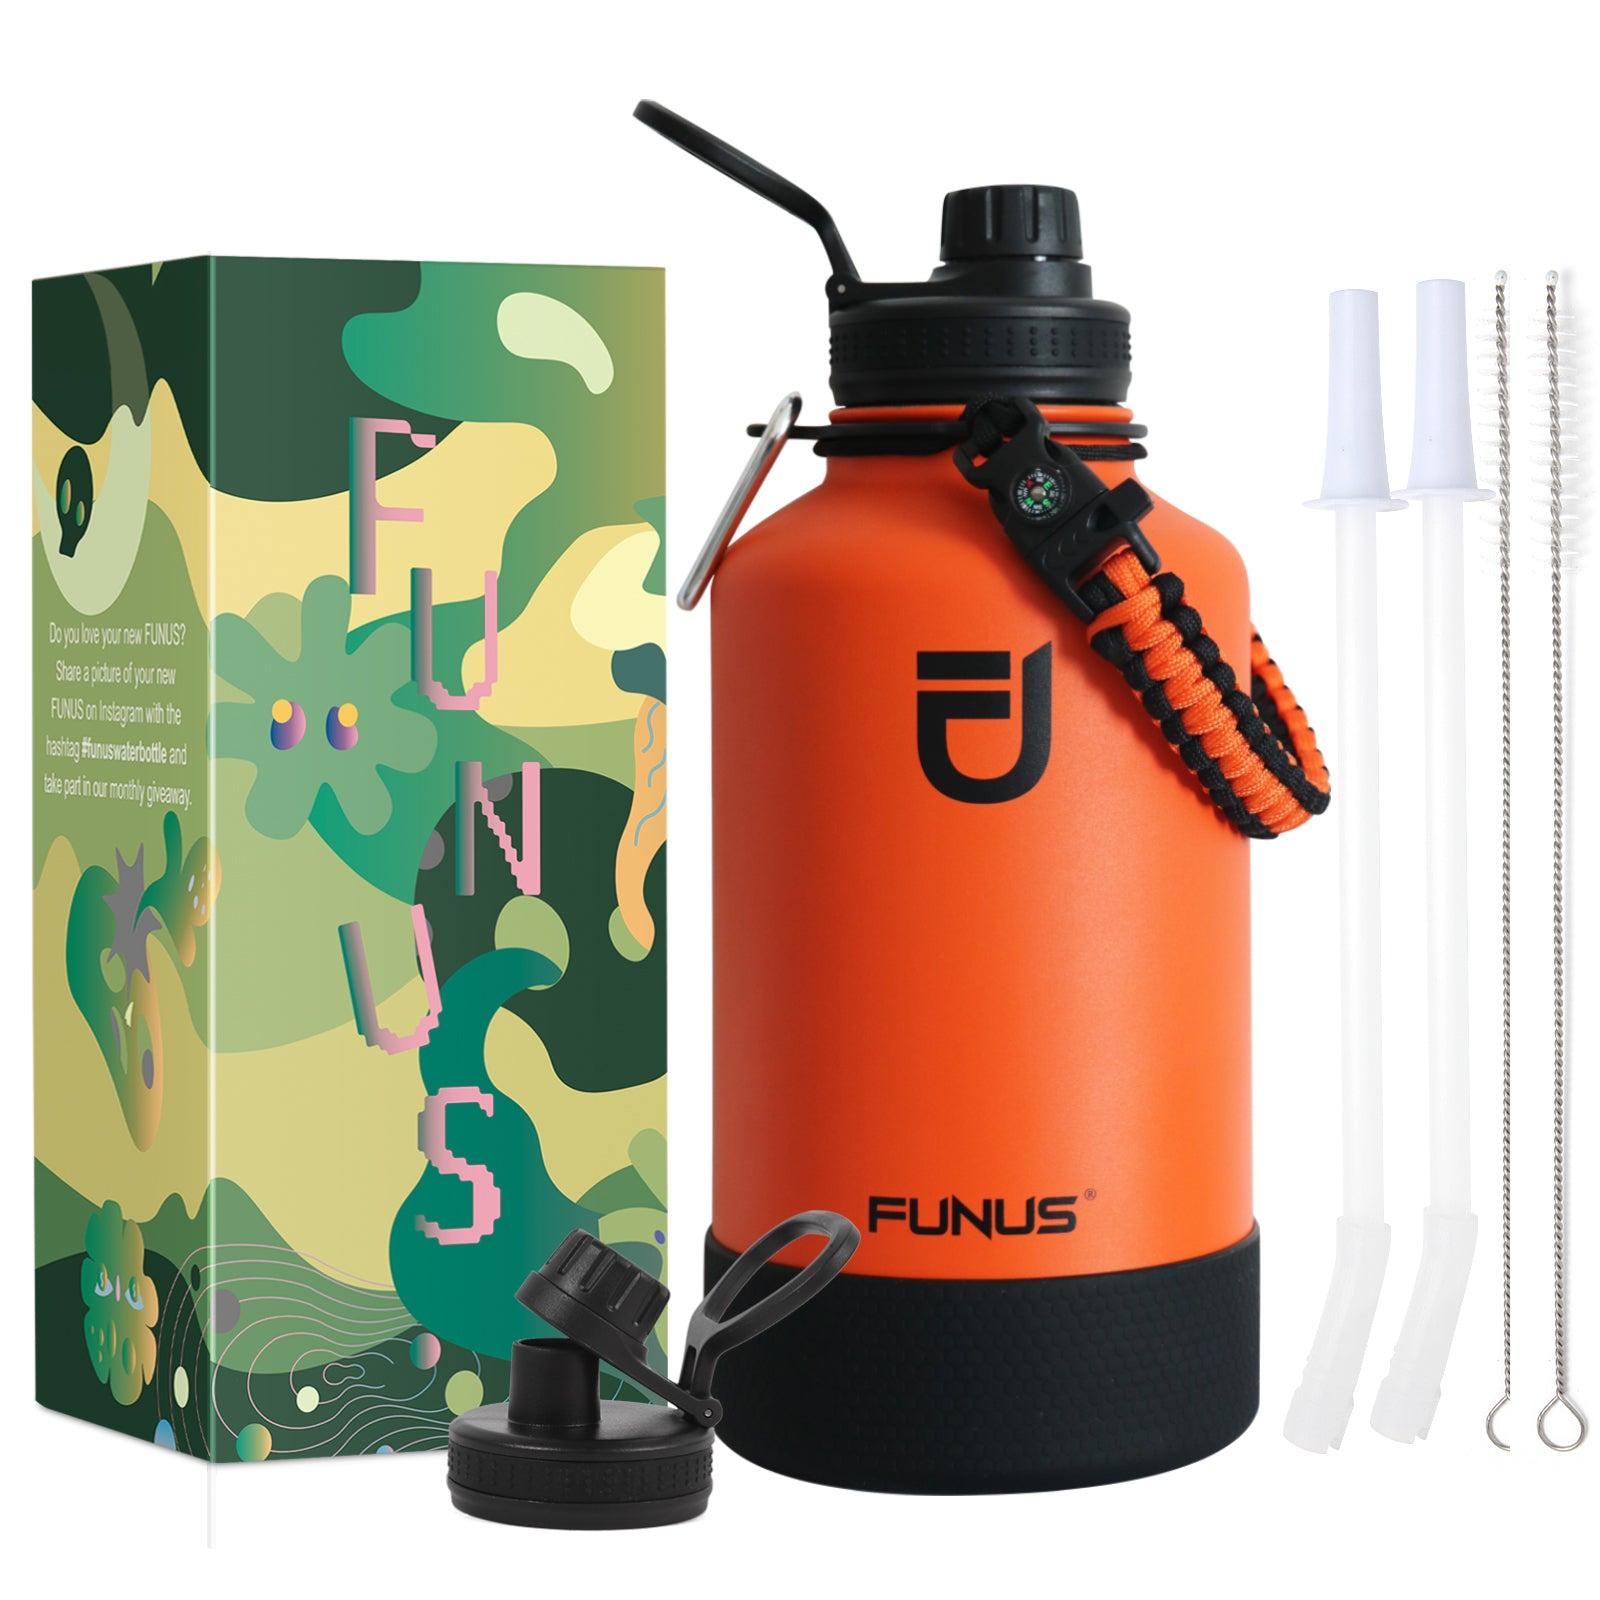 FUNUS Insulated Water Bottle, 64 oz Keep Beverages Cold for 24 Hrs